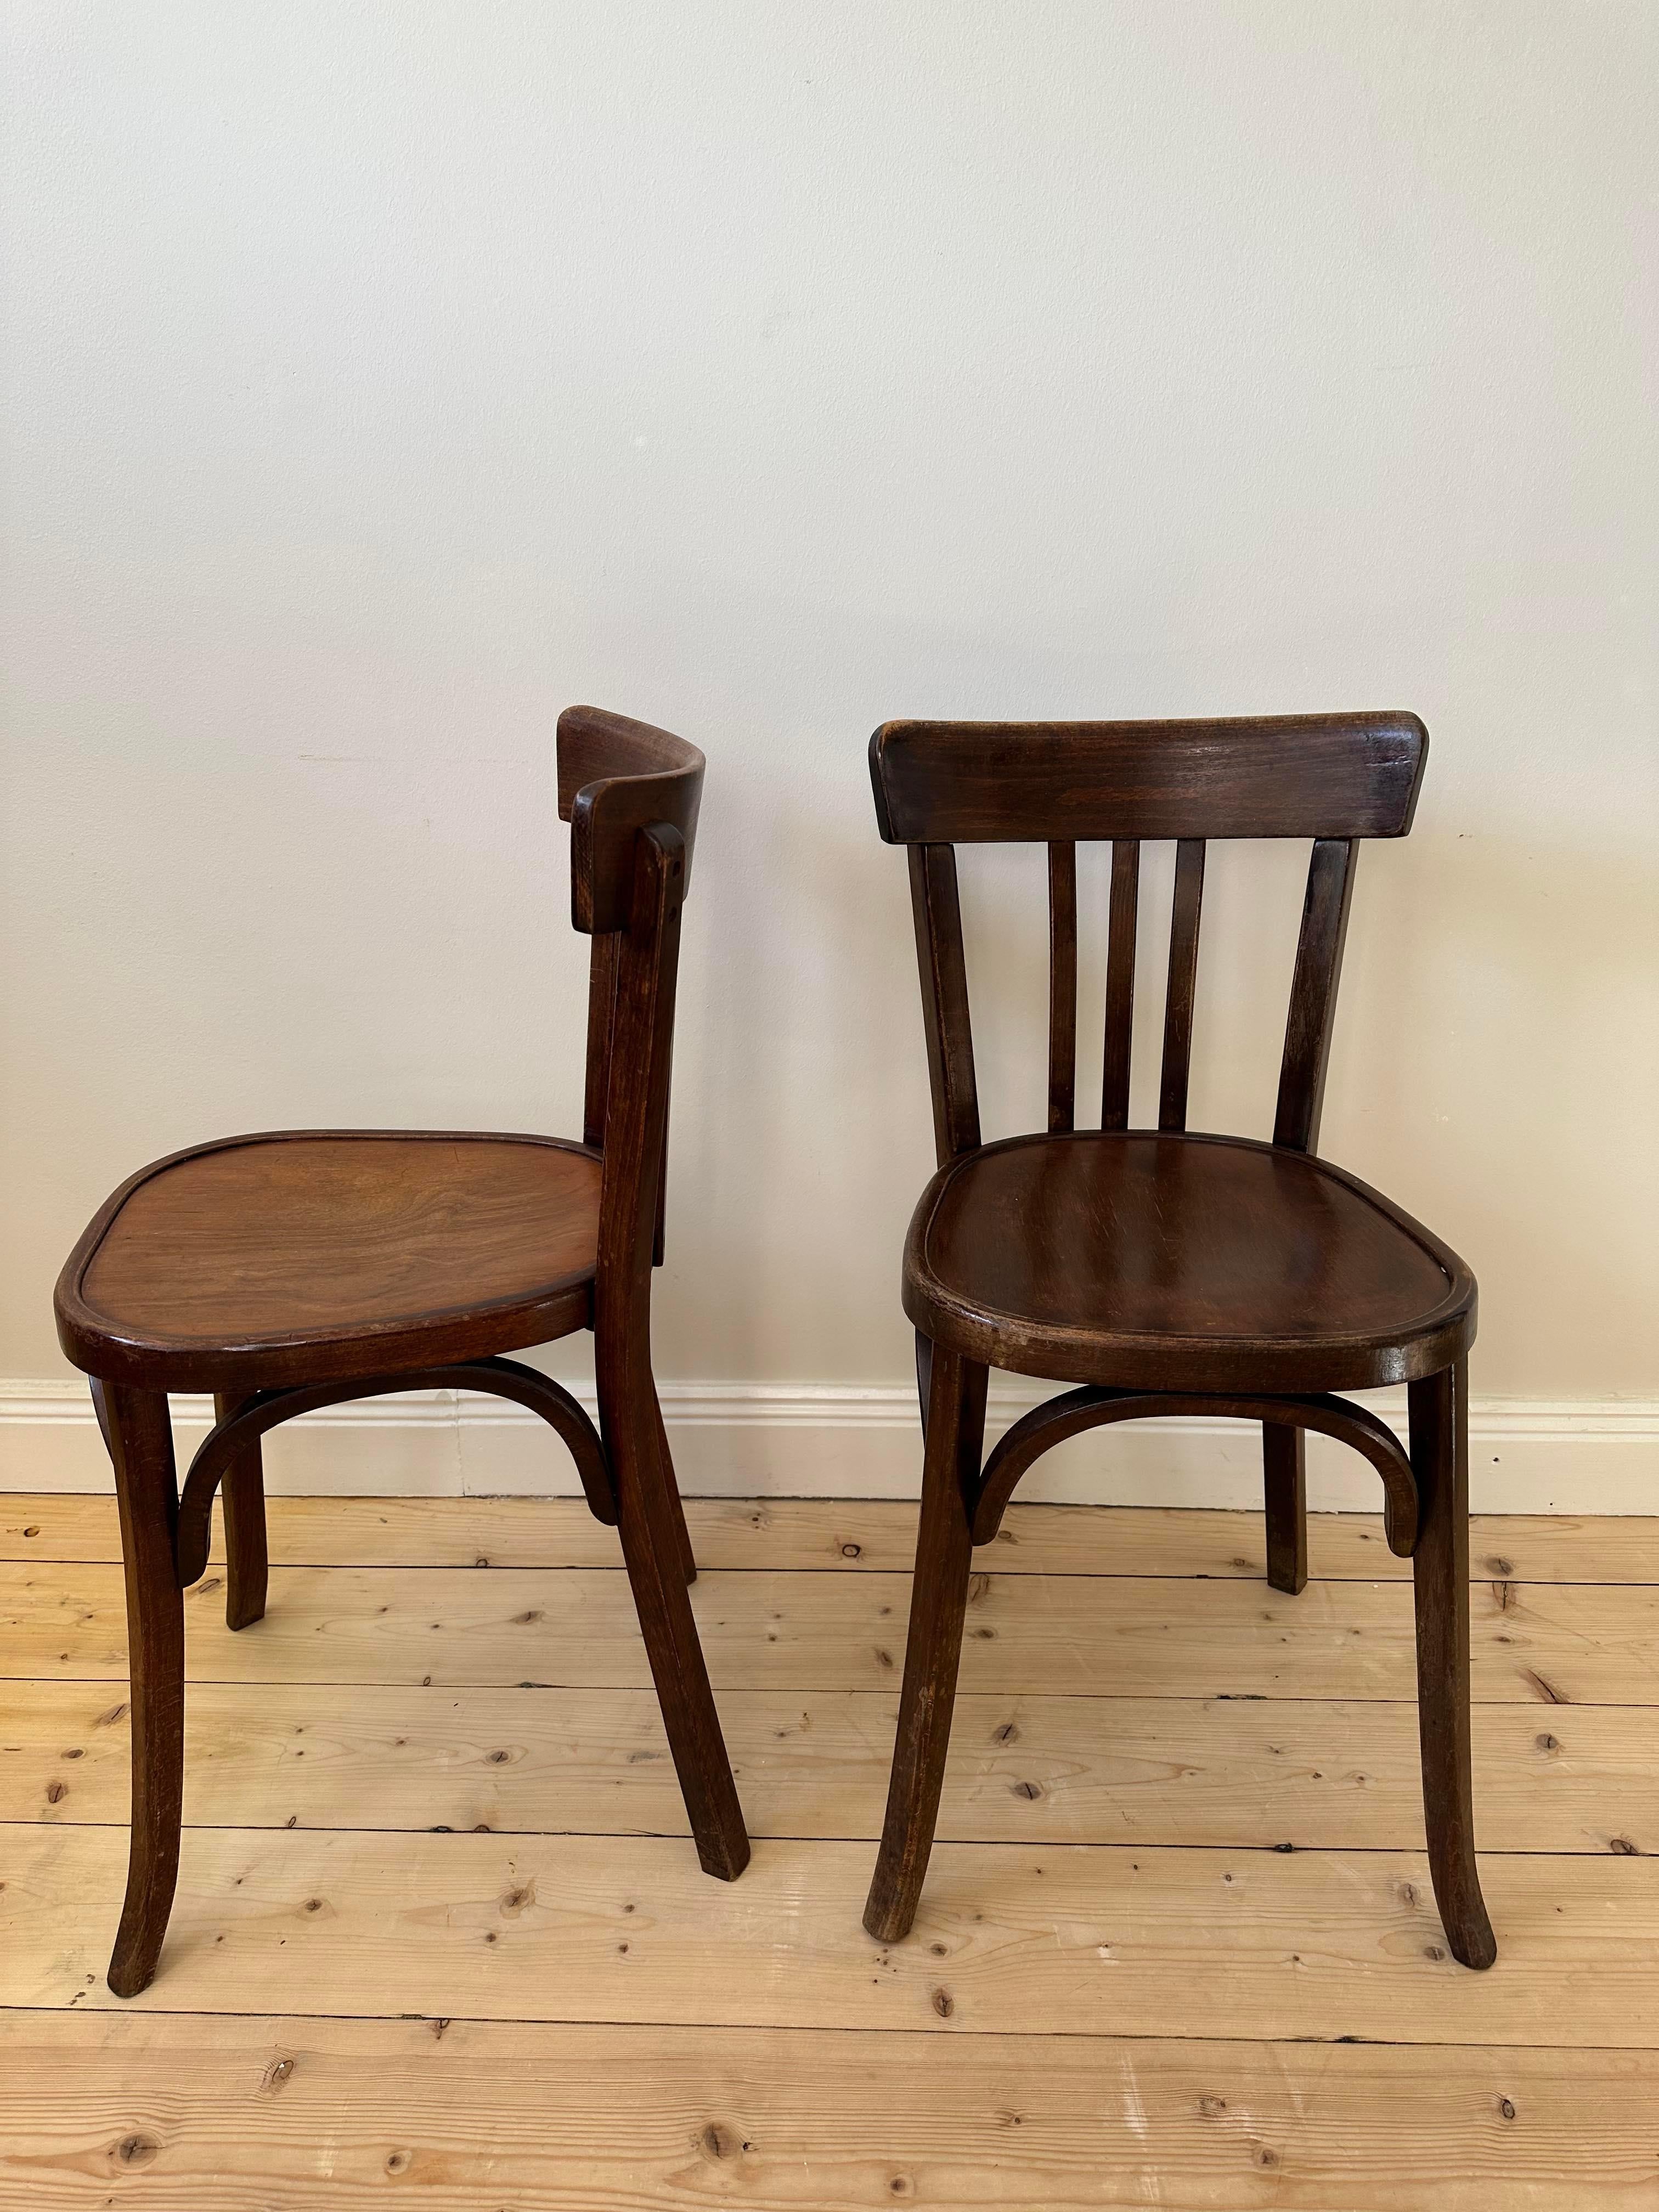 2 classic bistro chairs from Paris, France.